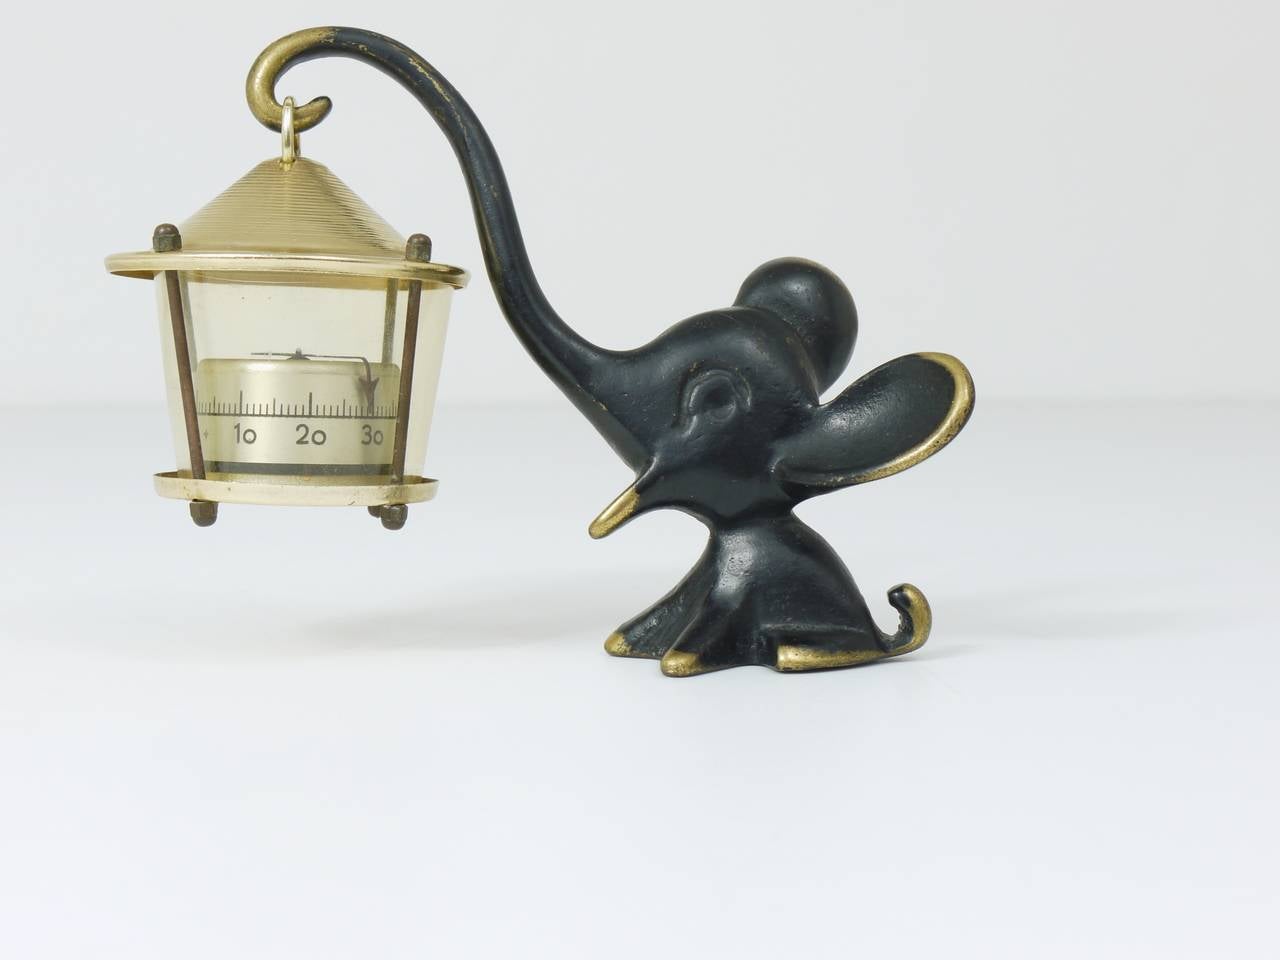 20th Century Walter Bosse Elephant Figurine with Thermometer by Herta Baller, Austria, 1950s